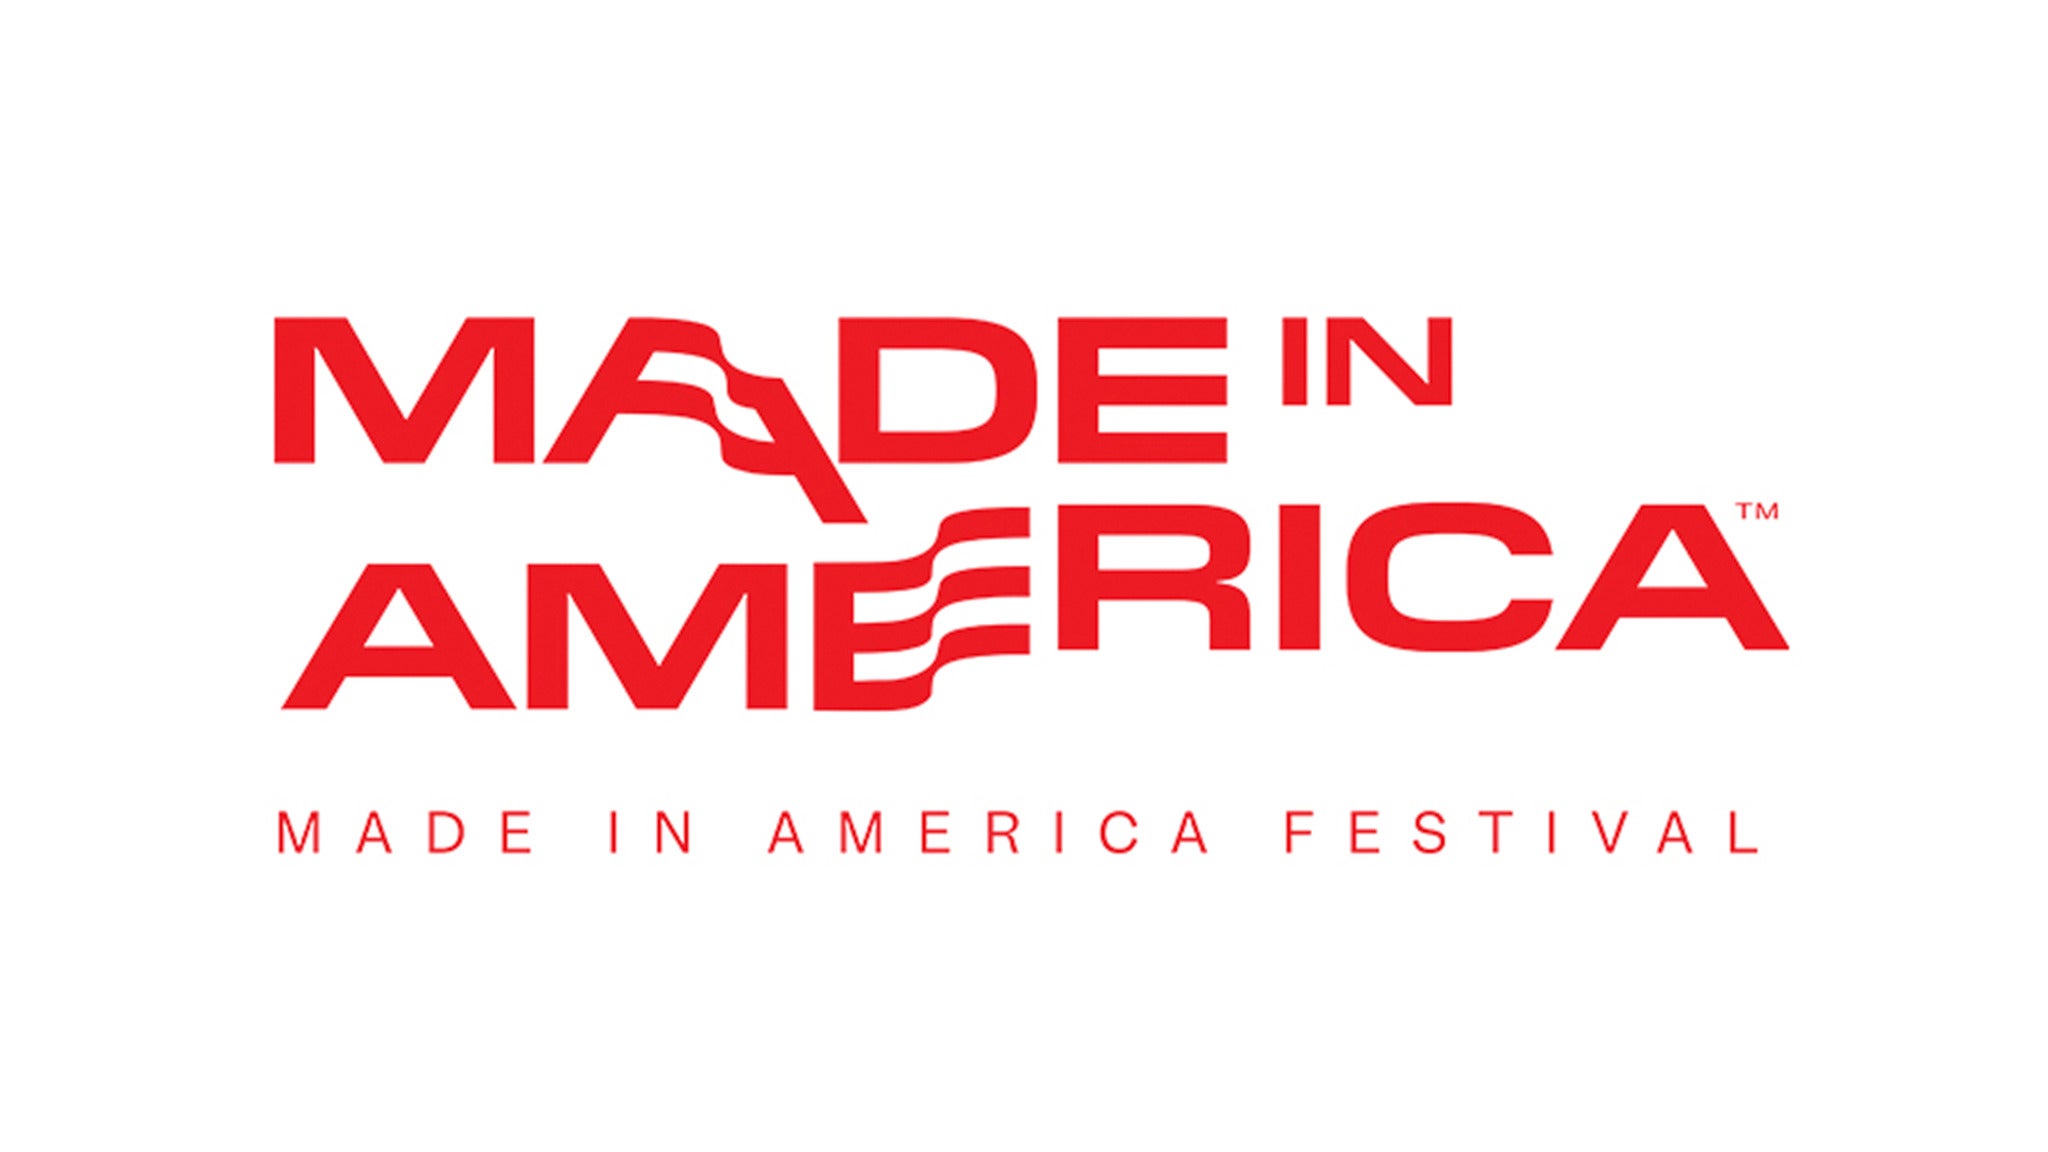 Made in America Festival is Back!